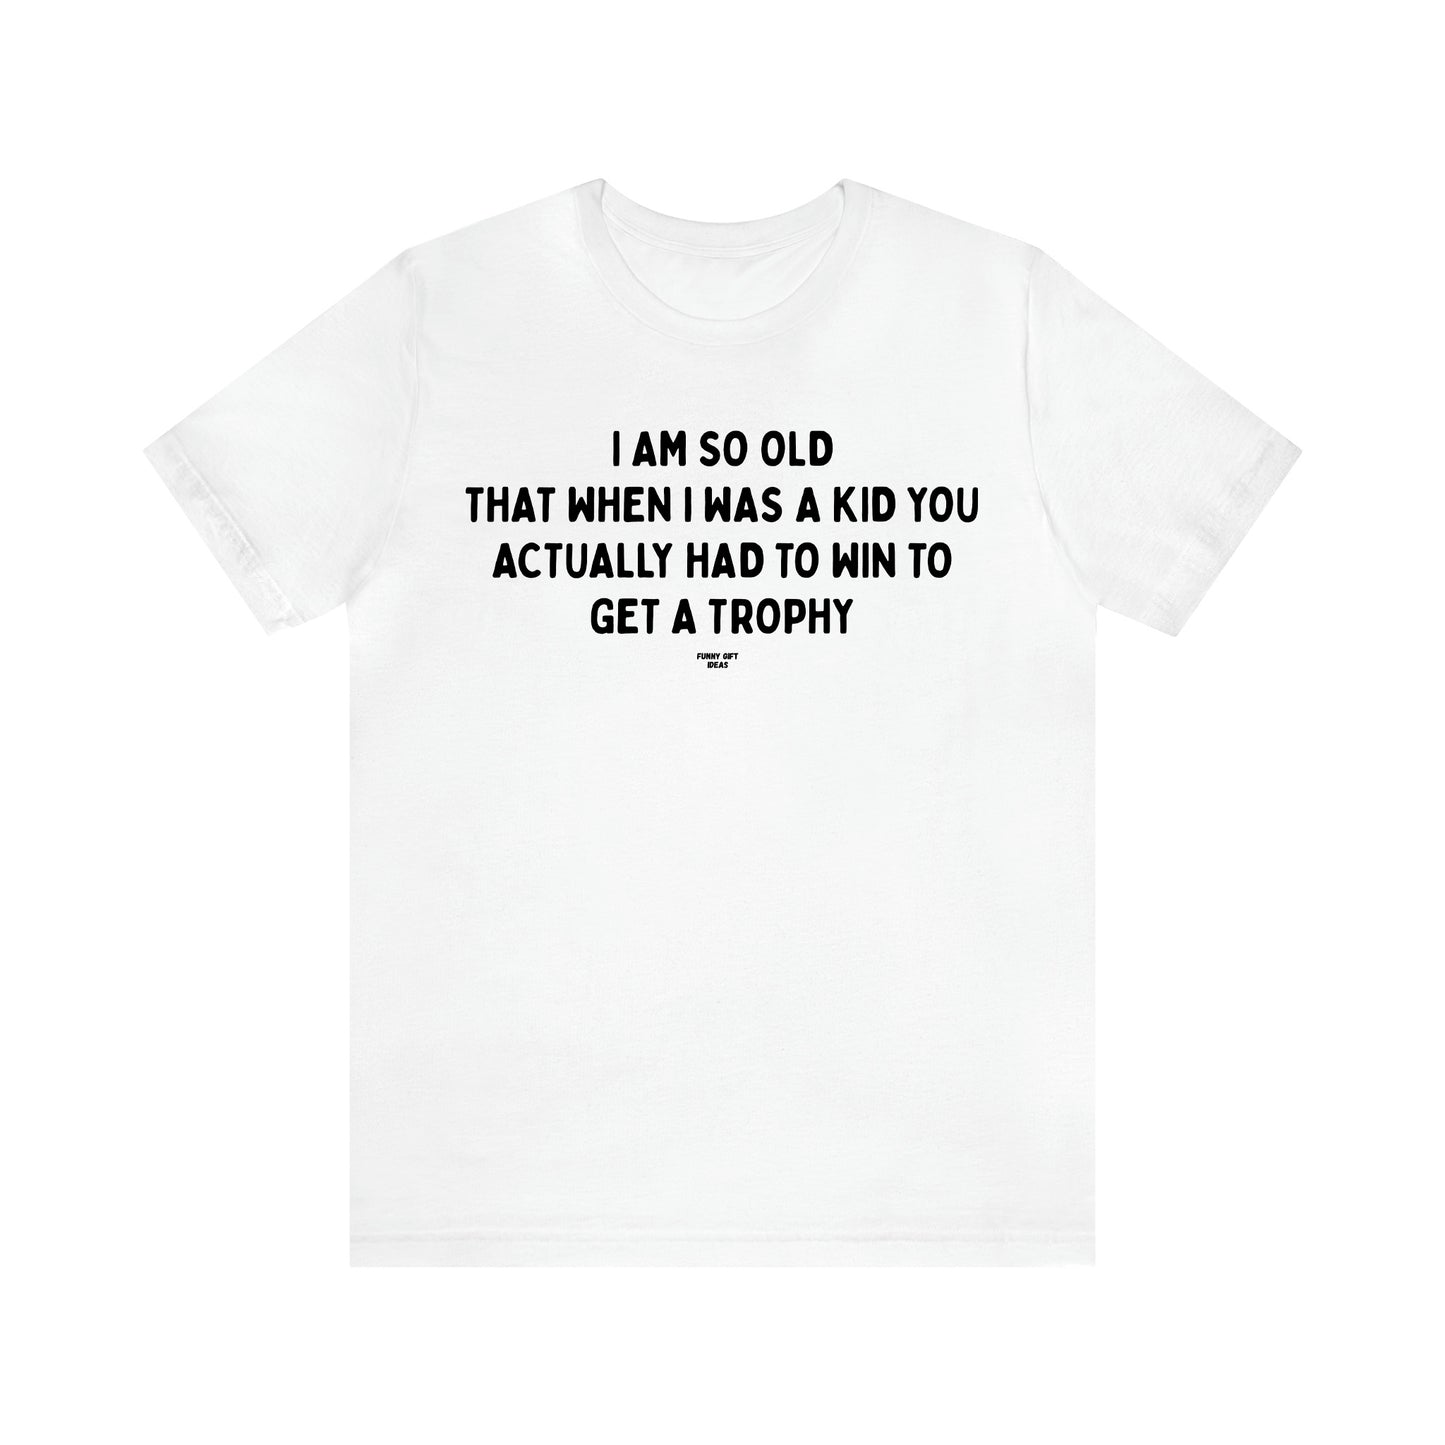 Men's T Shirts I Am So Old That When I Was a Kid You Actually Had to Win to Get a Trophy - Funny Gift Ideas